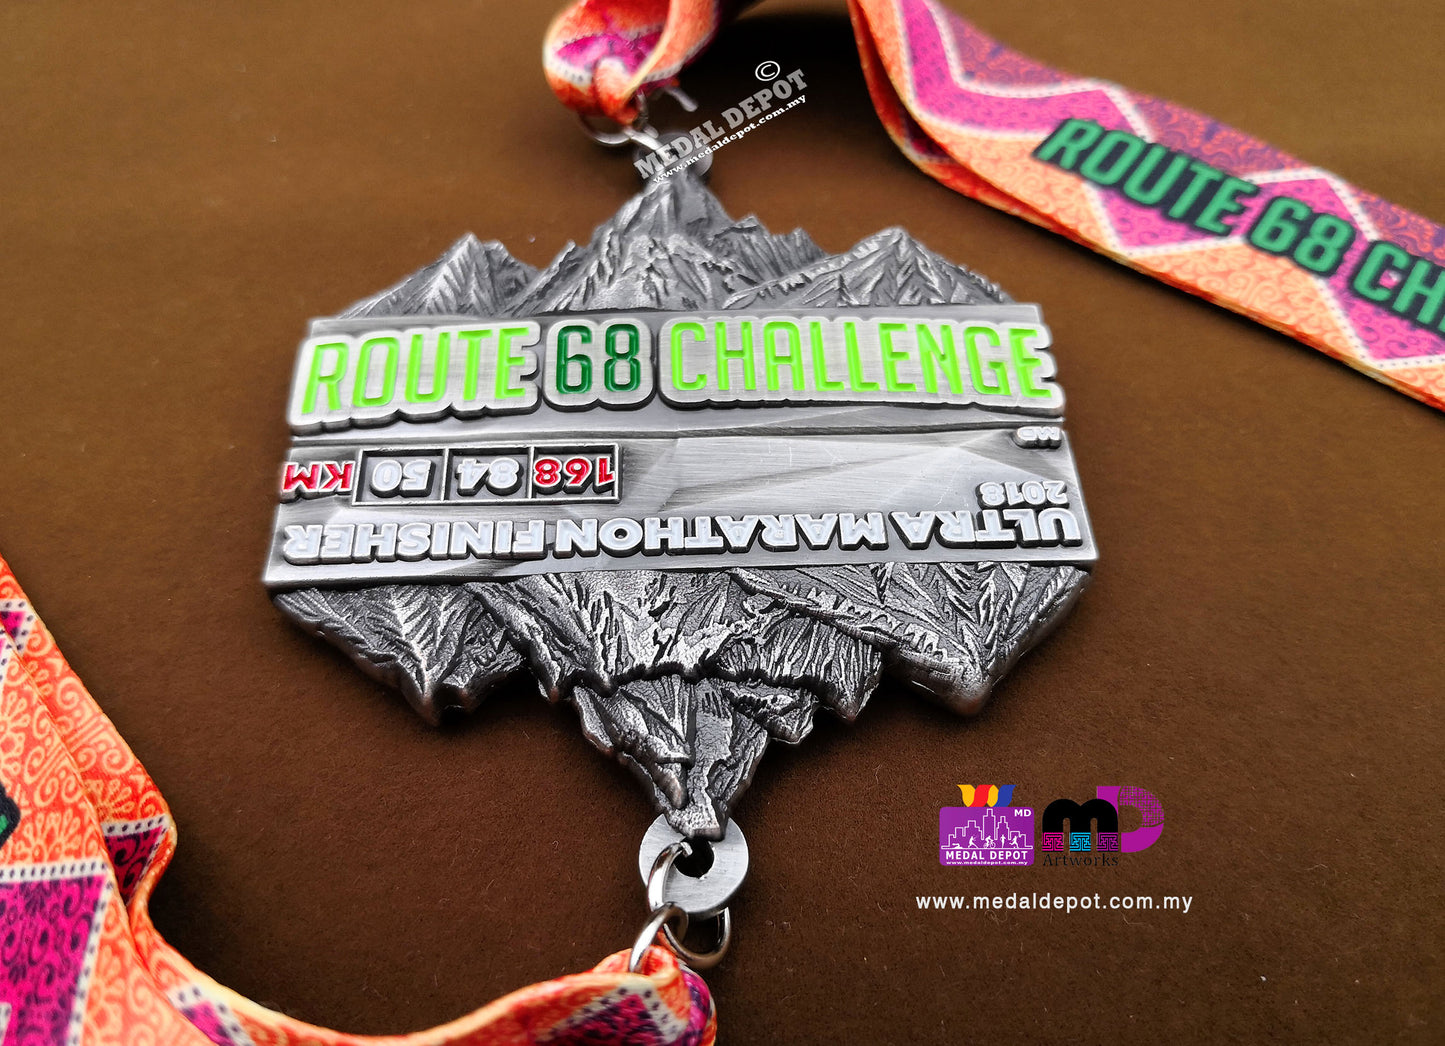 Route68 Challenge 2018